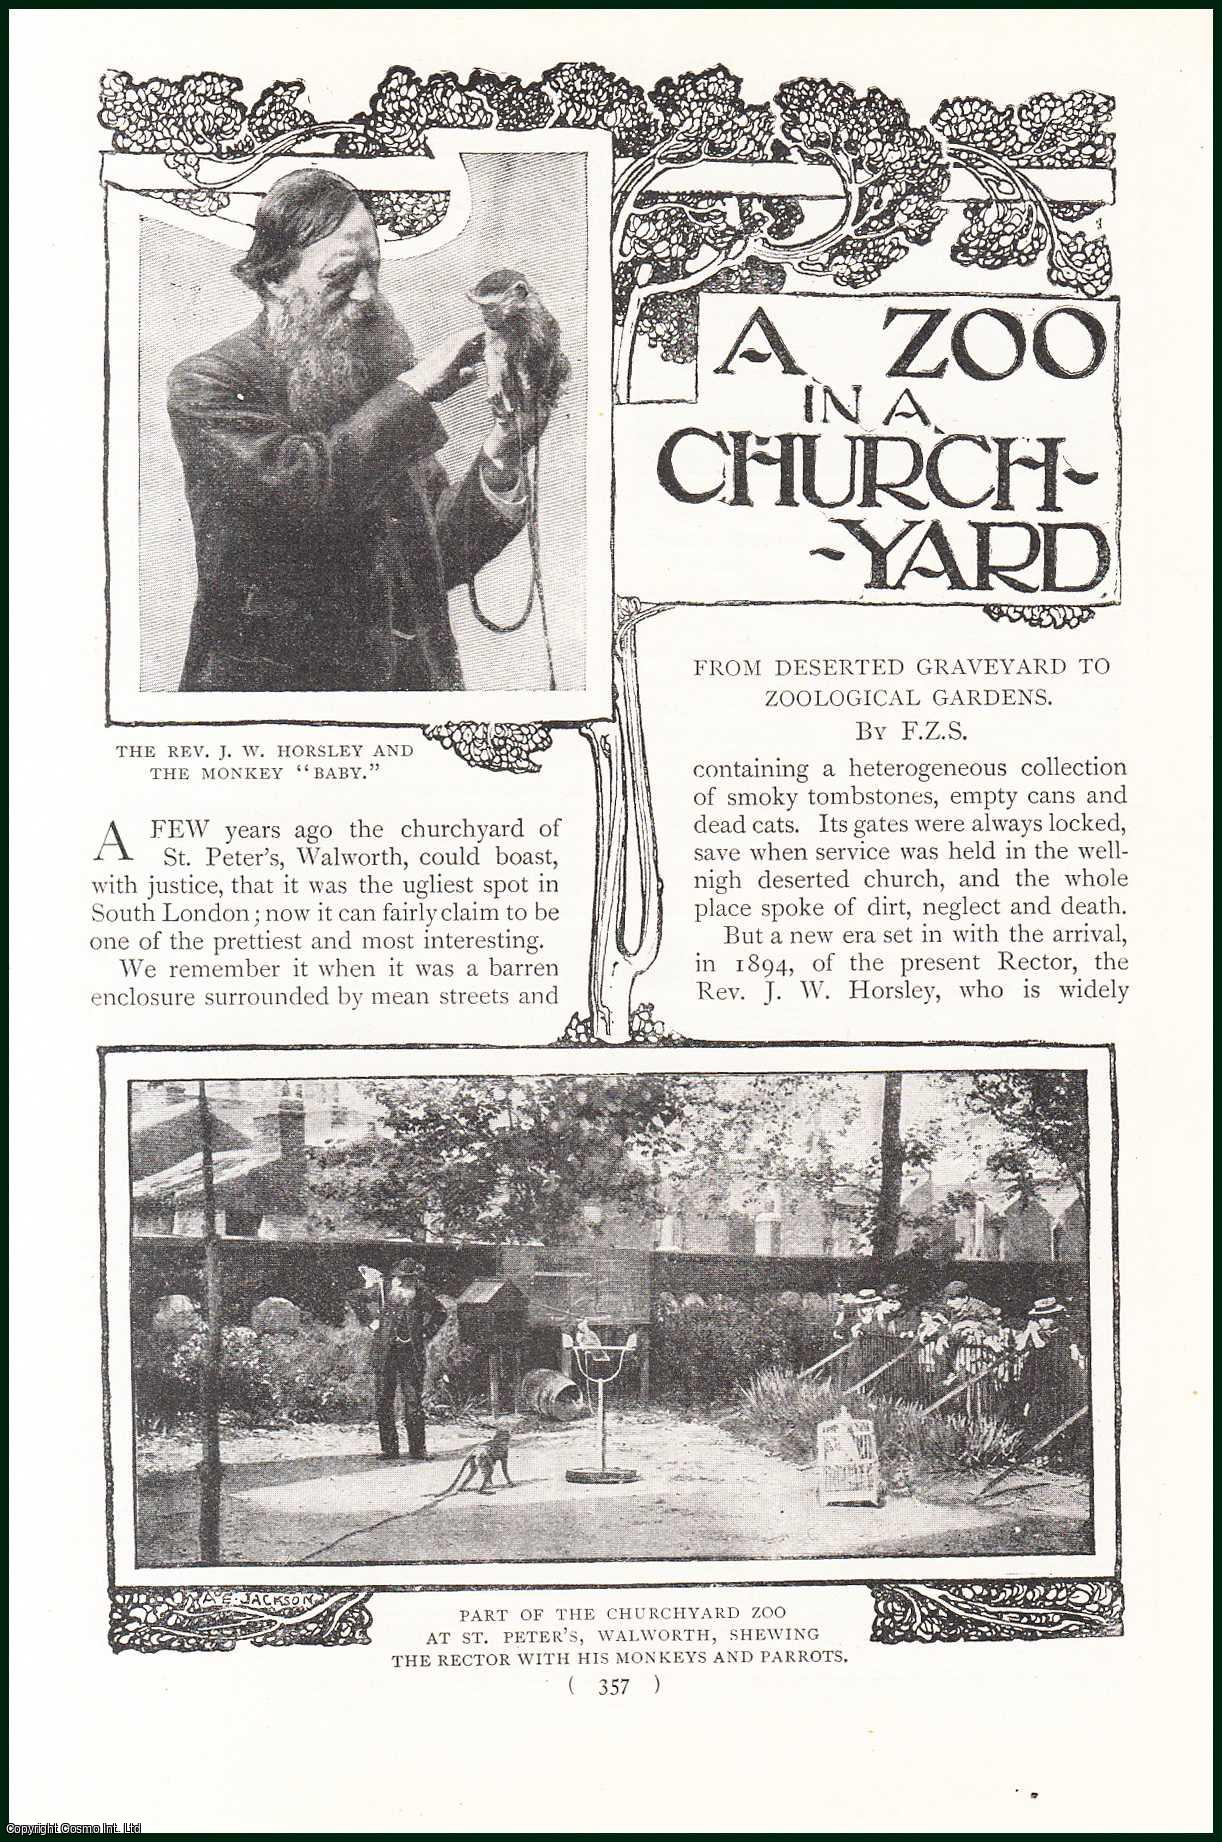 F.Z.S. - The Churchyard of St. Peter's, Walworth, South London, Now A Zoo : From Deserted Graveyard to Zoological Gardens. An uncommon original article from the Harmsworth London Magazine, 1901.